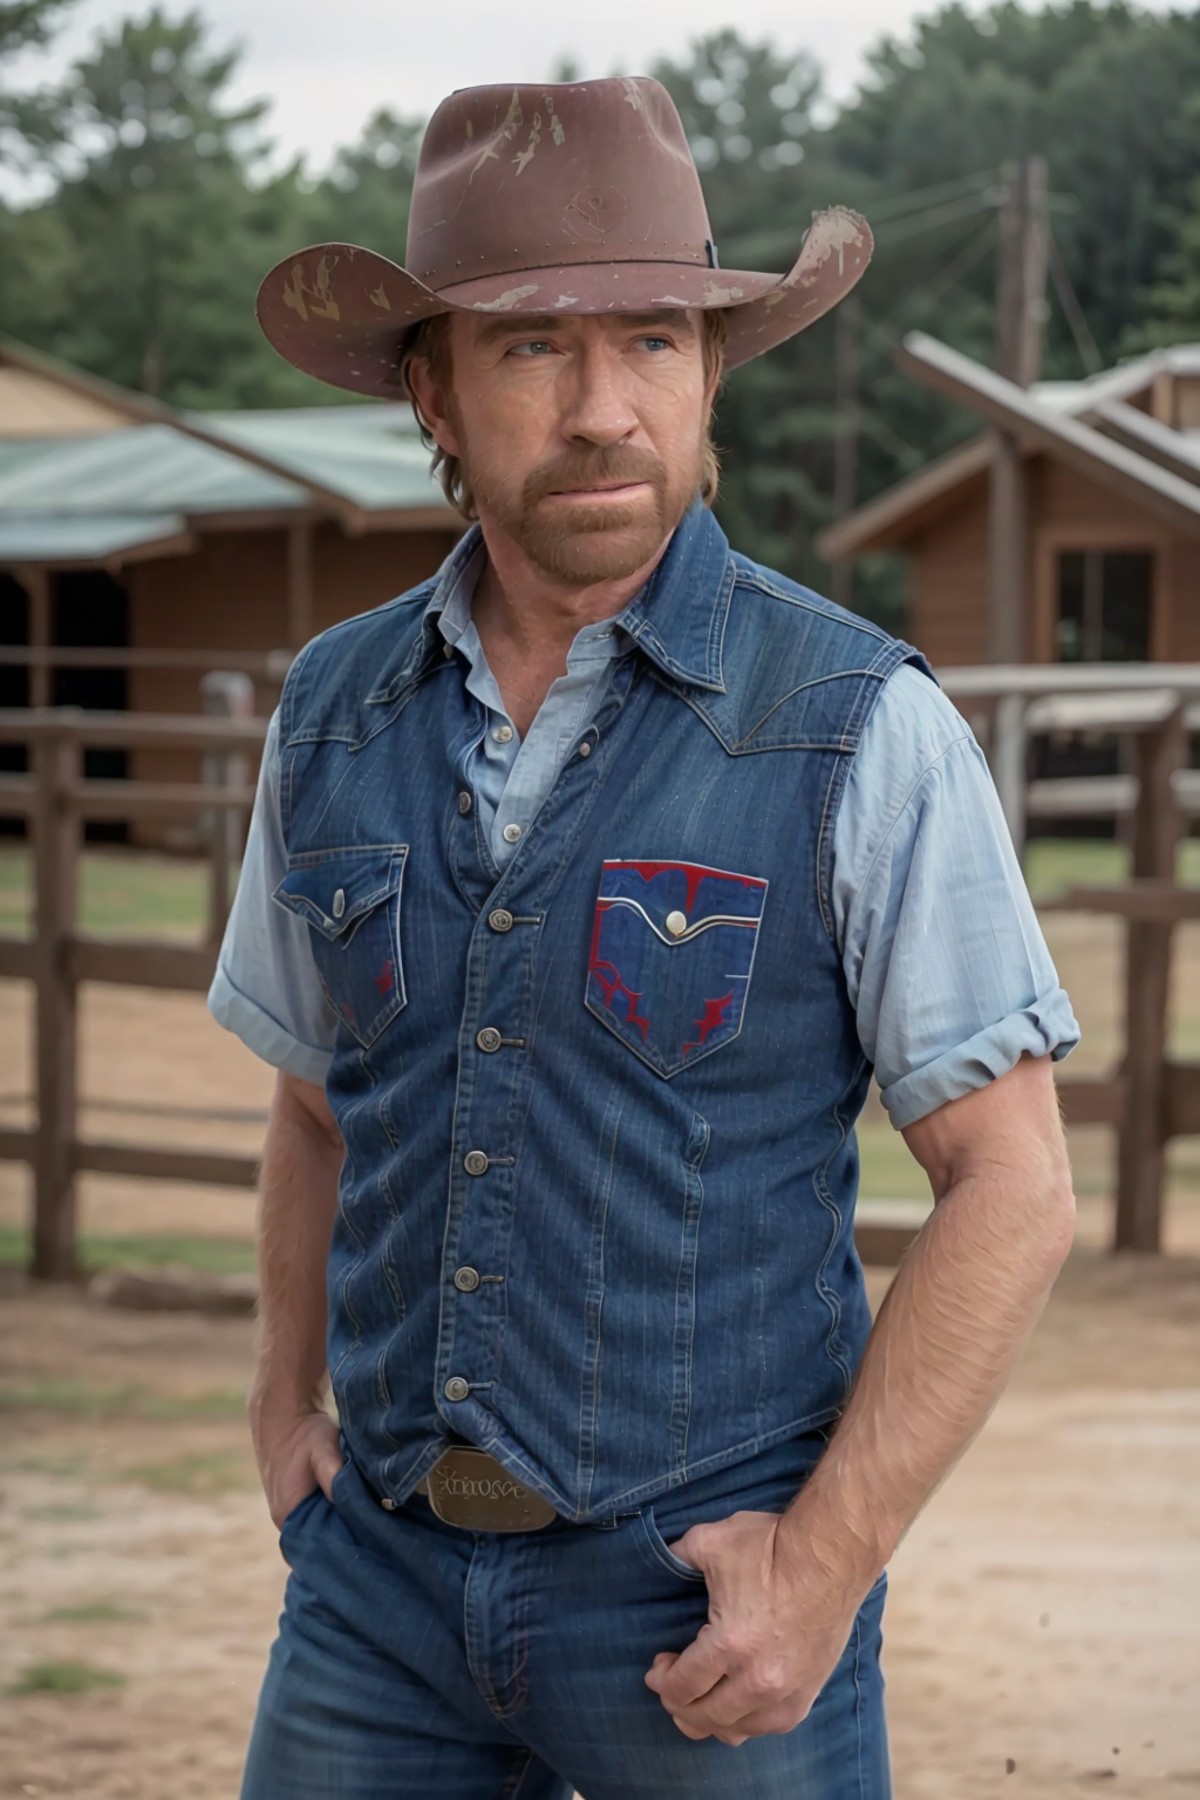 chucknorris, dressed as a texas ranger jeans boots hat shirt vest outoors
(masterpiece:1.2) (photorealistic:1.2) (bokeh) (...